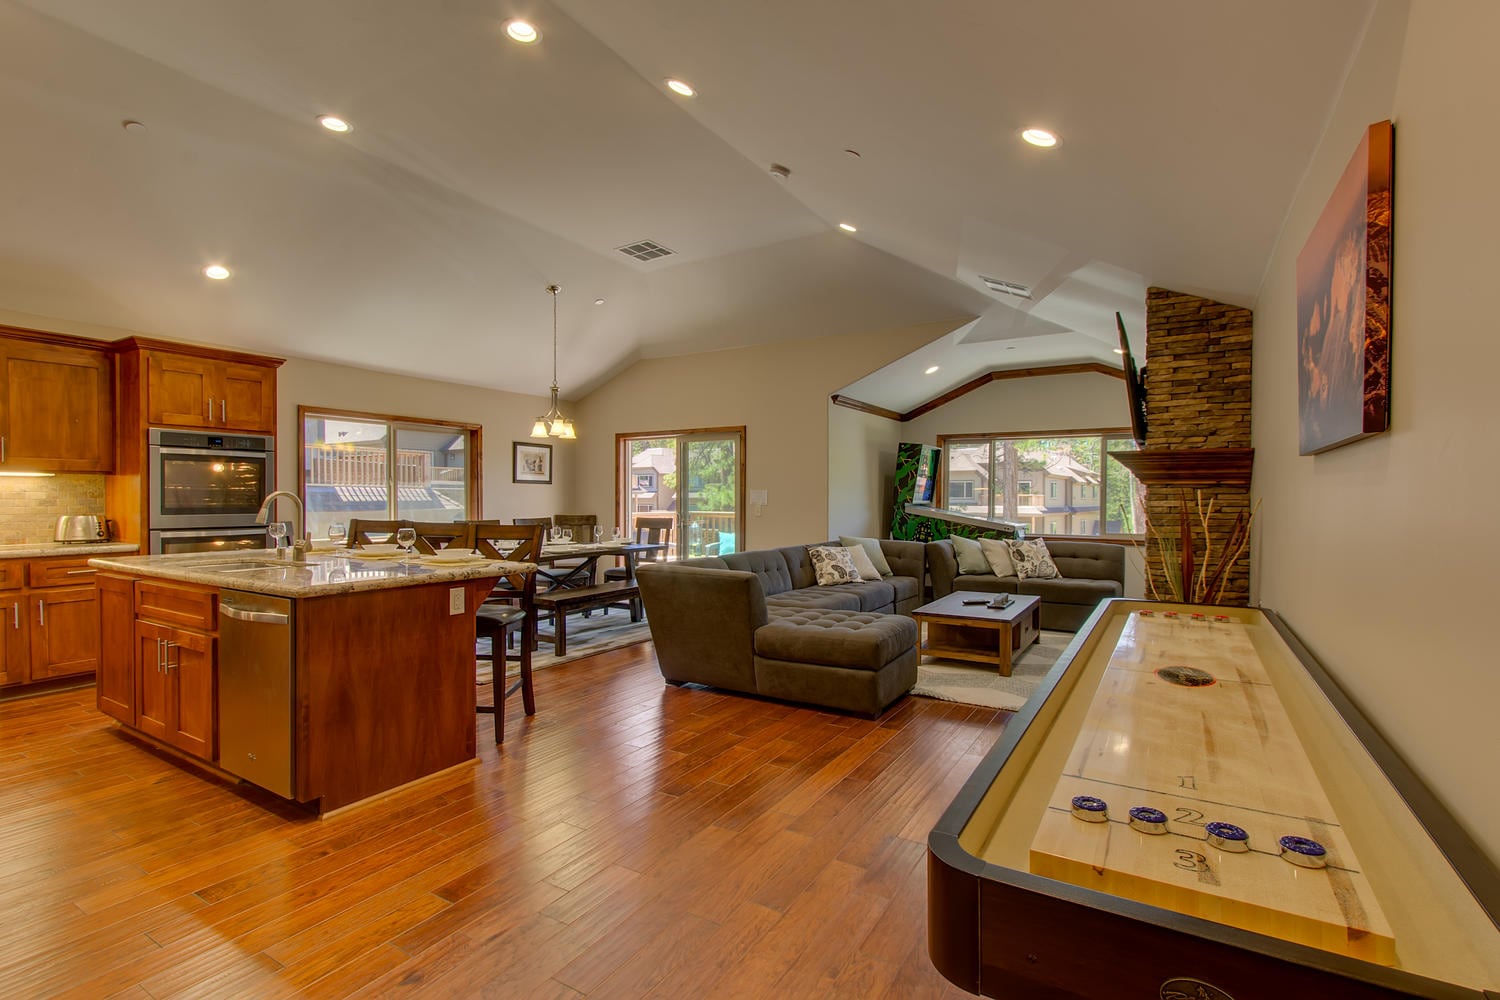 Shuffle board with living area